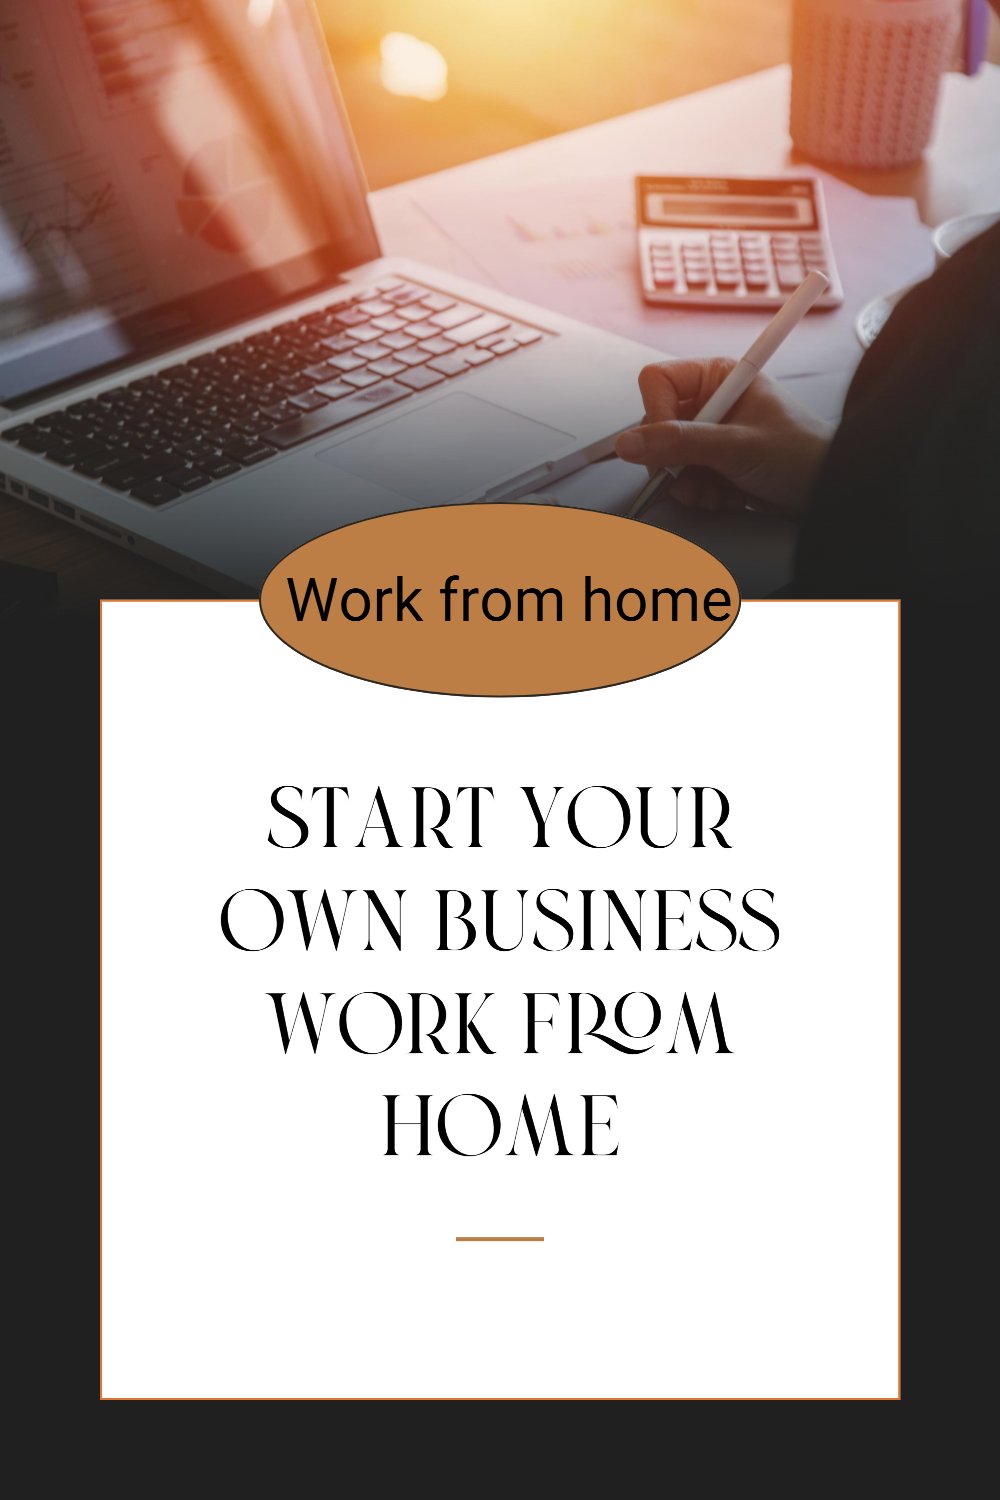  ATTENTION MOMS!  Do you want to earn daily pay while working from home?